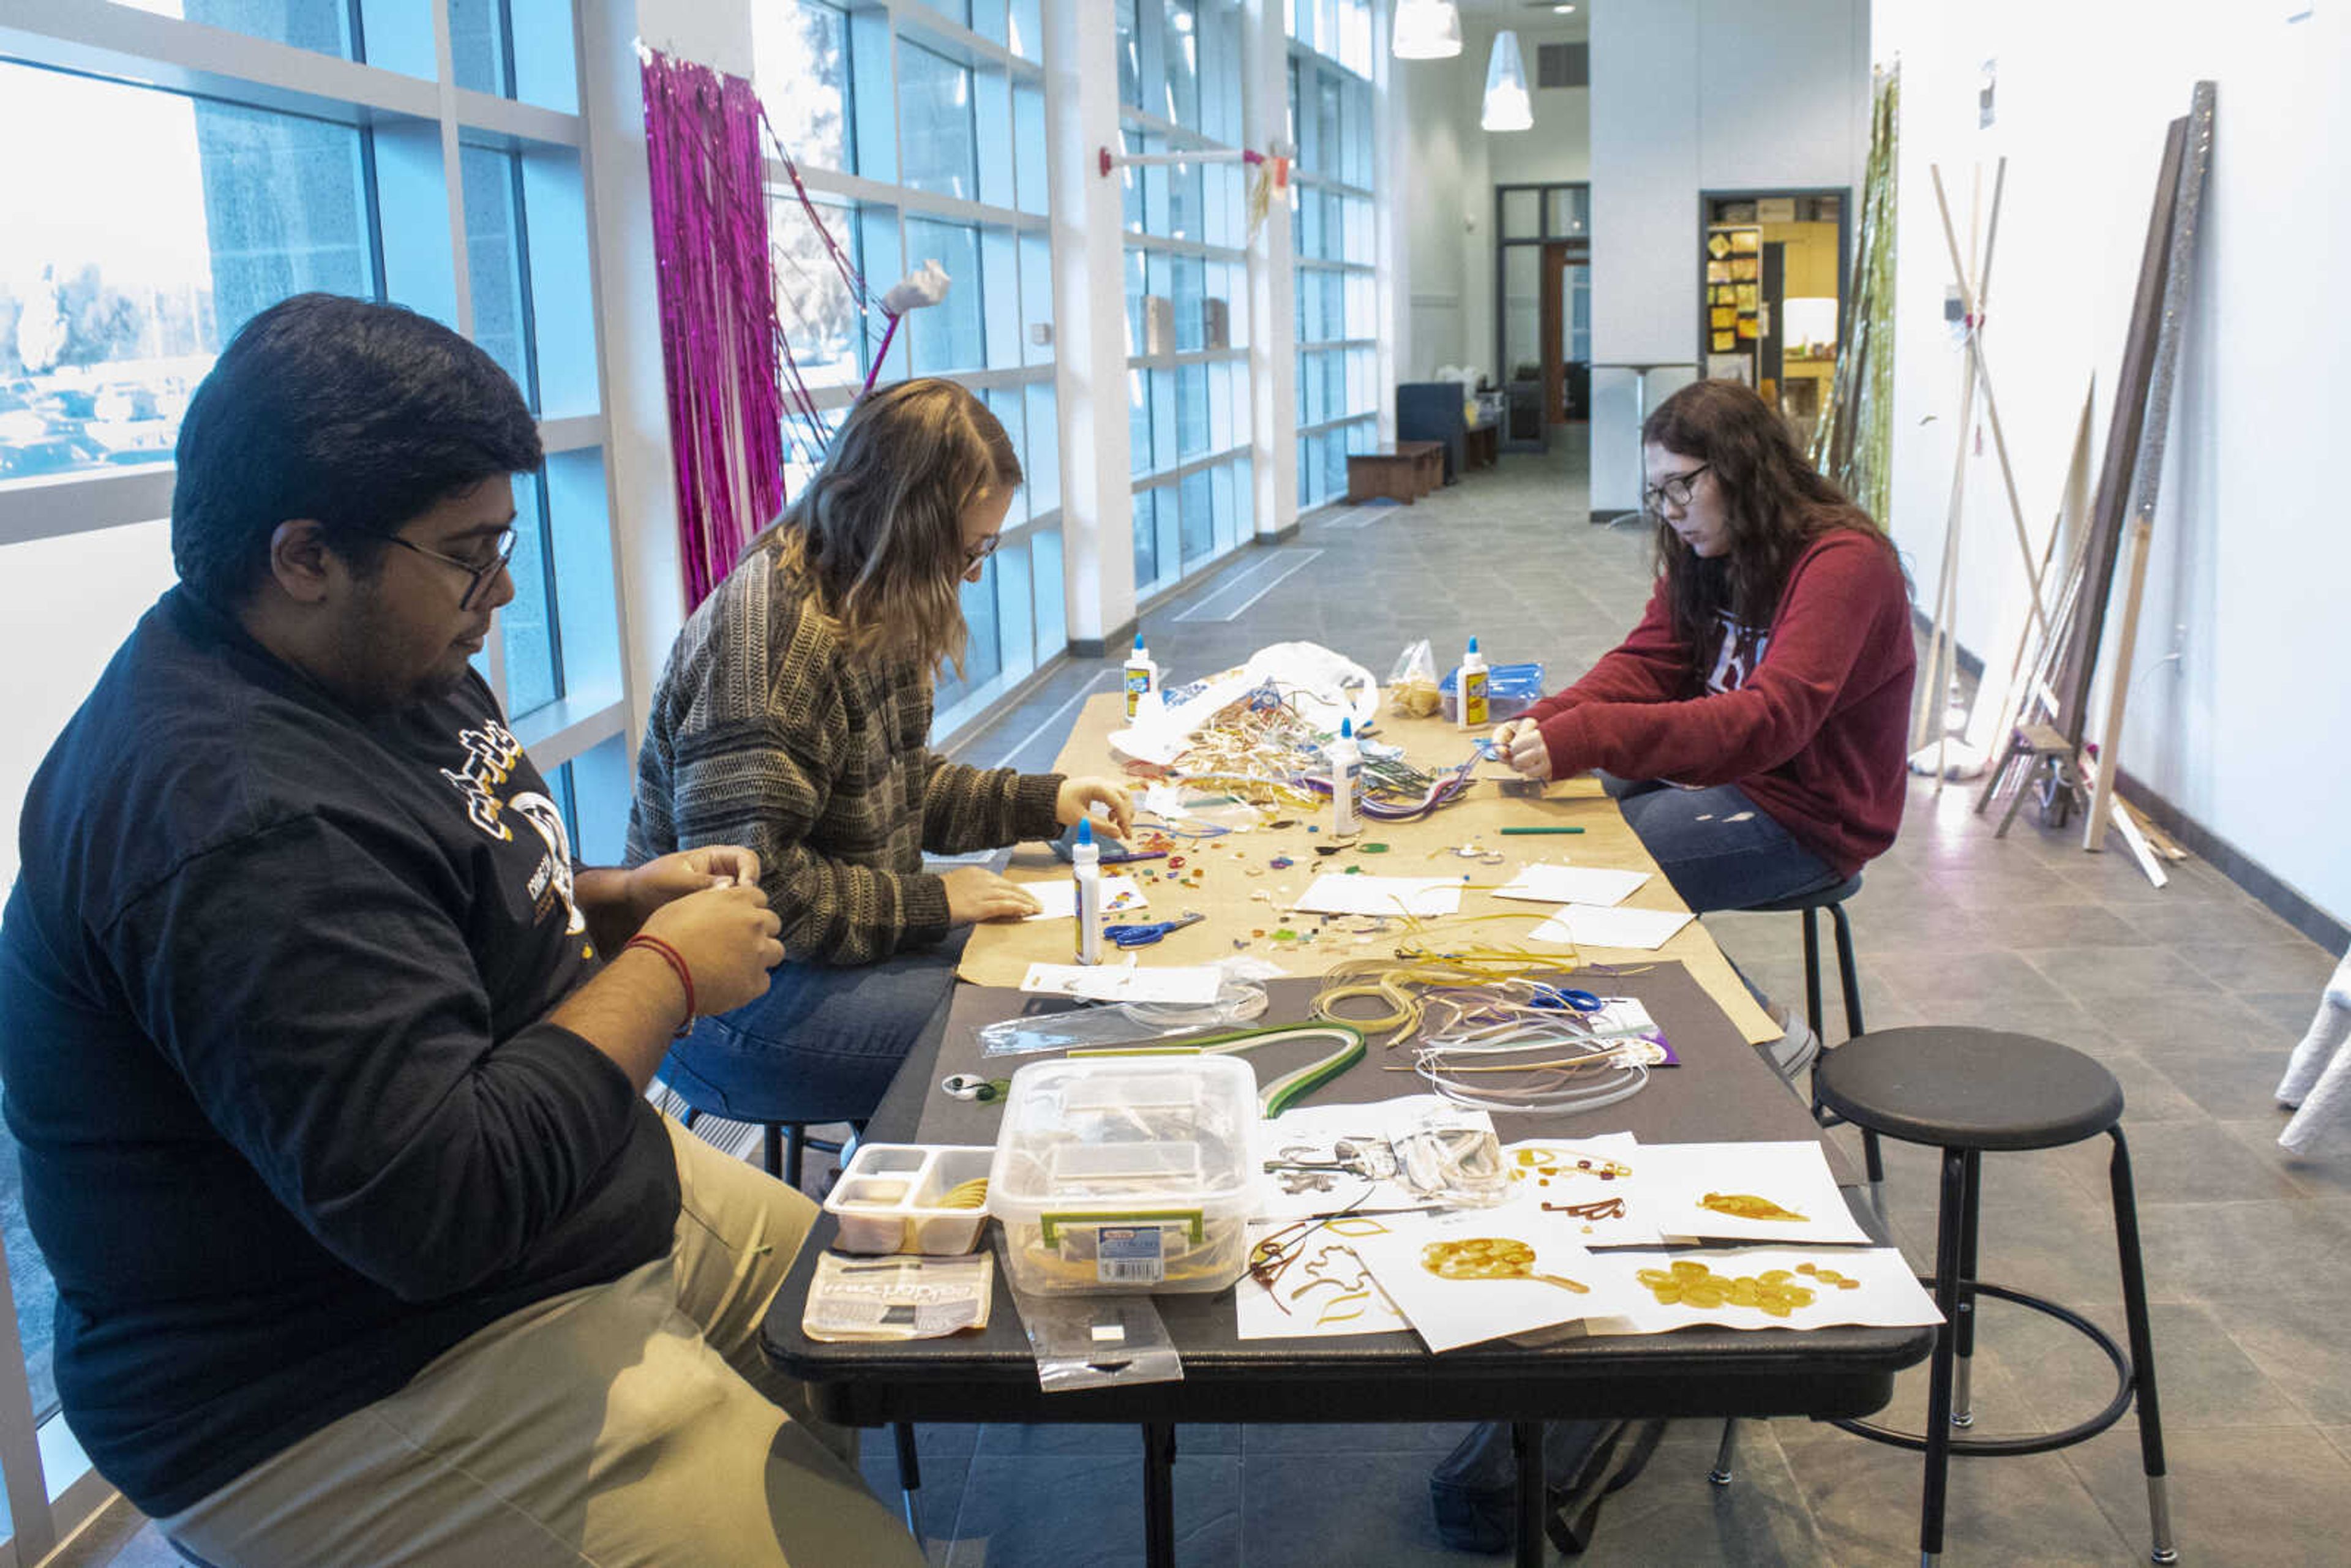 Southeast students Rahul Nair, Emily Reese, and Jordan Stonehouse work on crafts at the Crisp Museum Folktale Day on Nov. 7